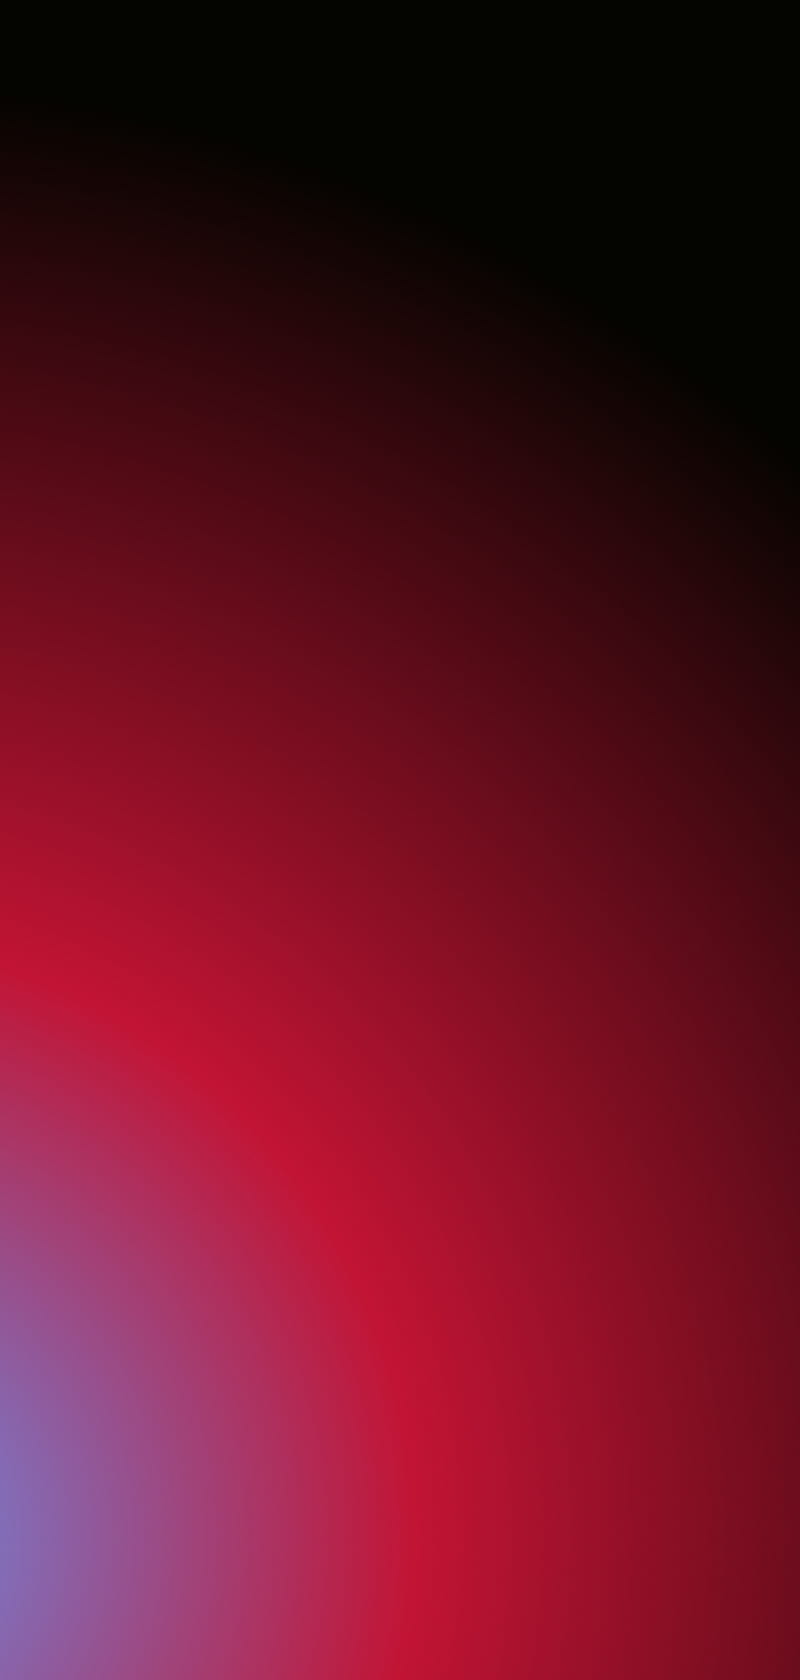 Red Notch Hide Aura Aurel Red Abstract Amoled Android Art Aura Aurora Hd Mobile Wallpaper Peakpx